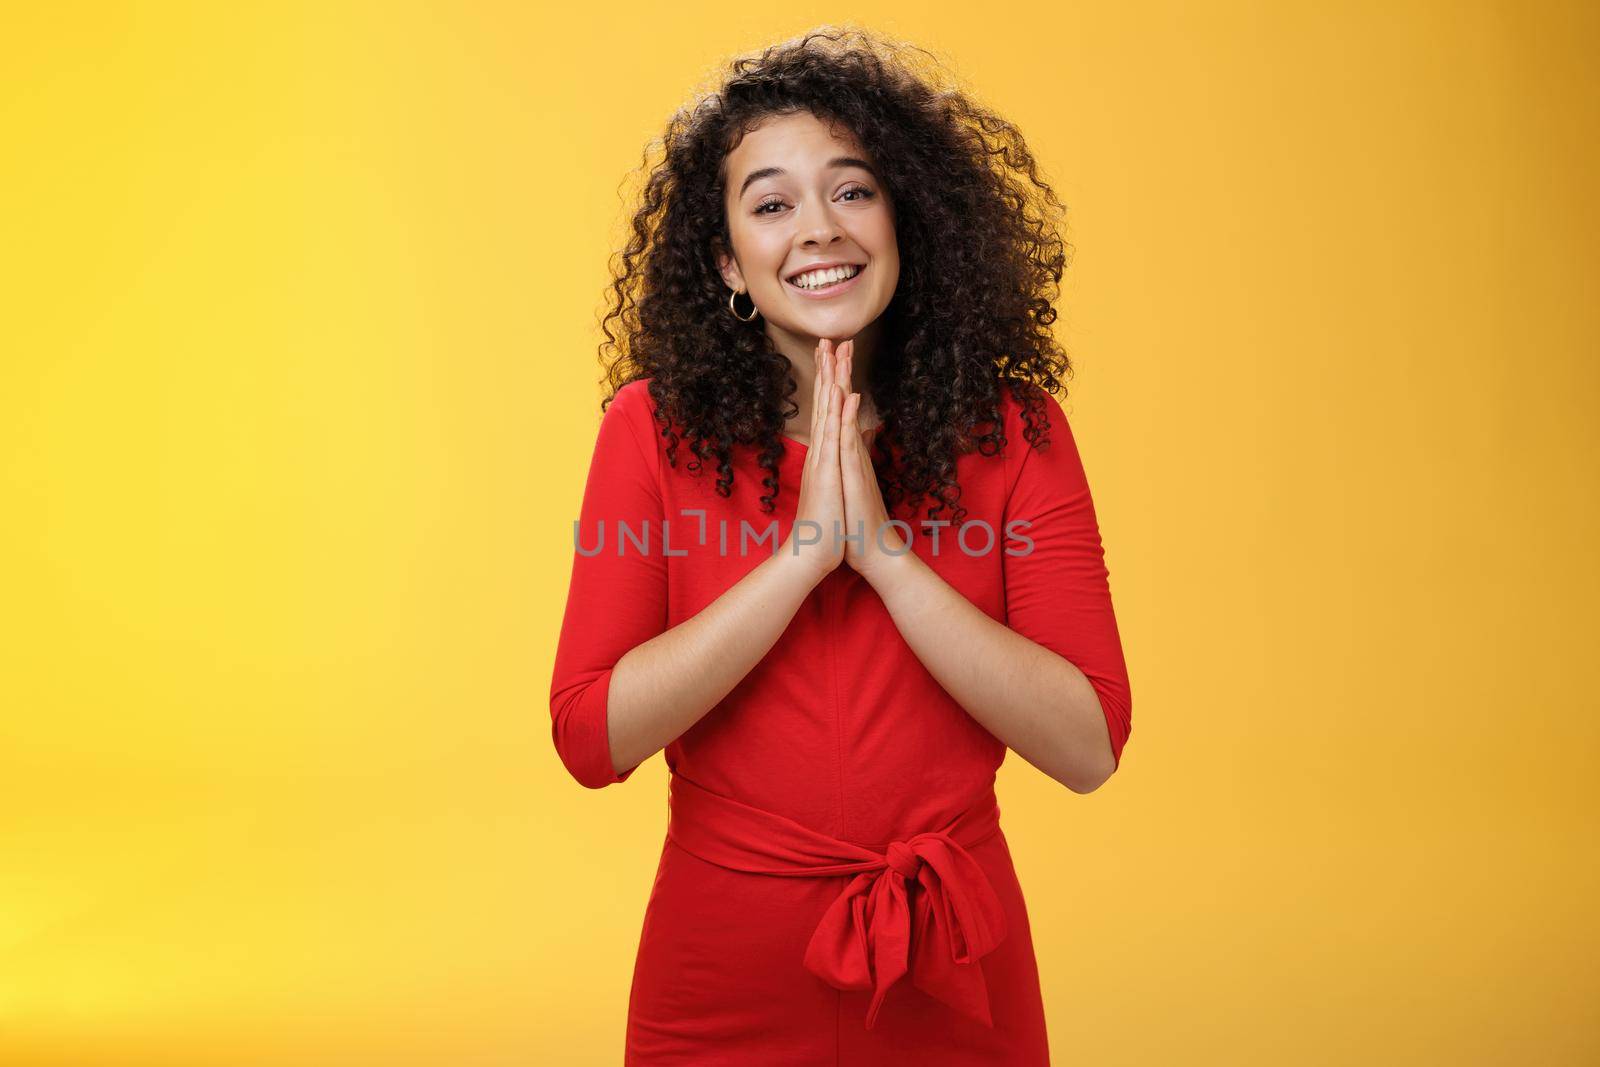 Girl with angel smile making eyes as wanting friend make favour, holding hands in pray, grinning and gazing with anticipation as begging for help standing silly and cute against yellow background.